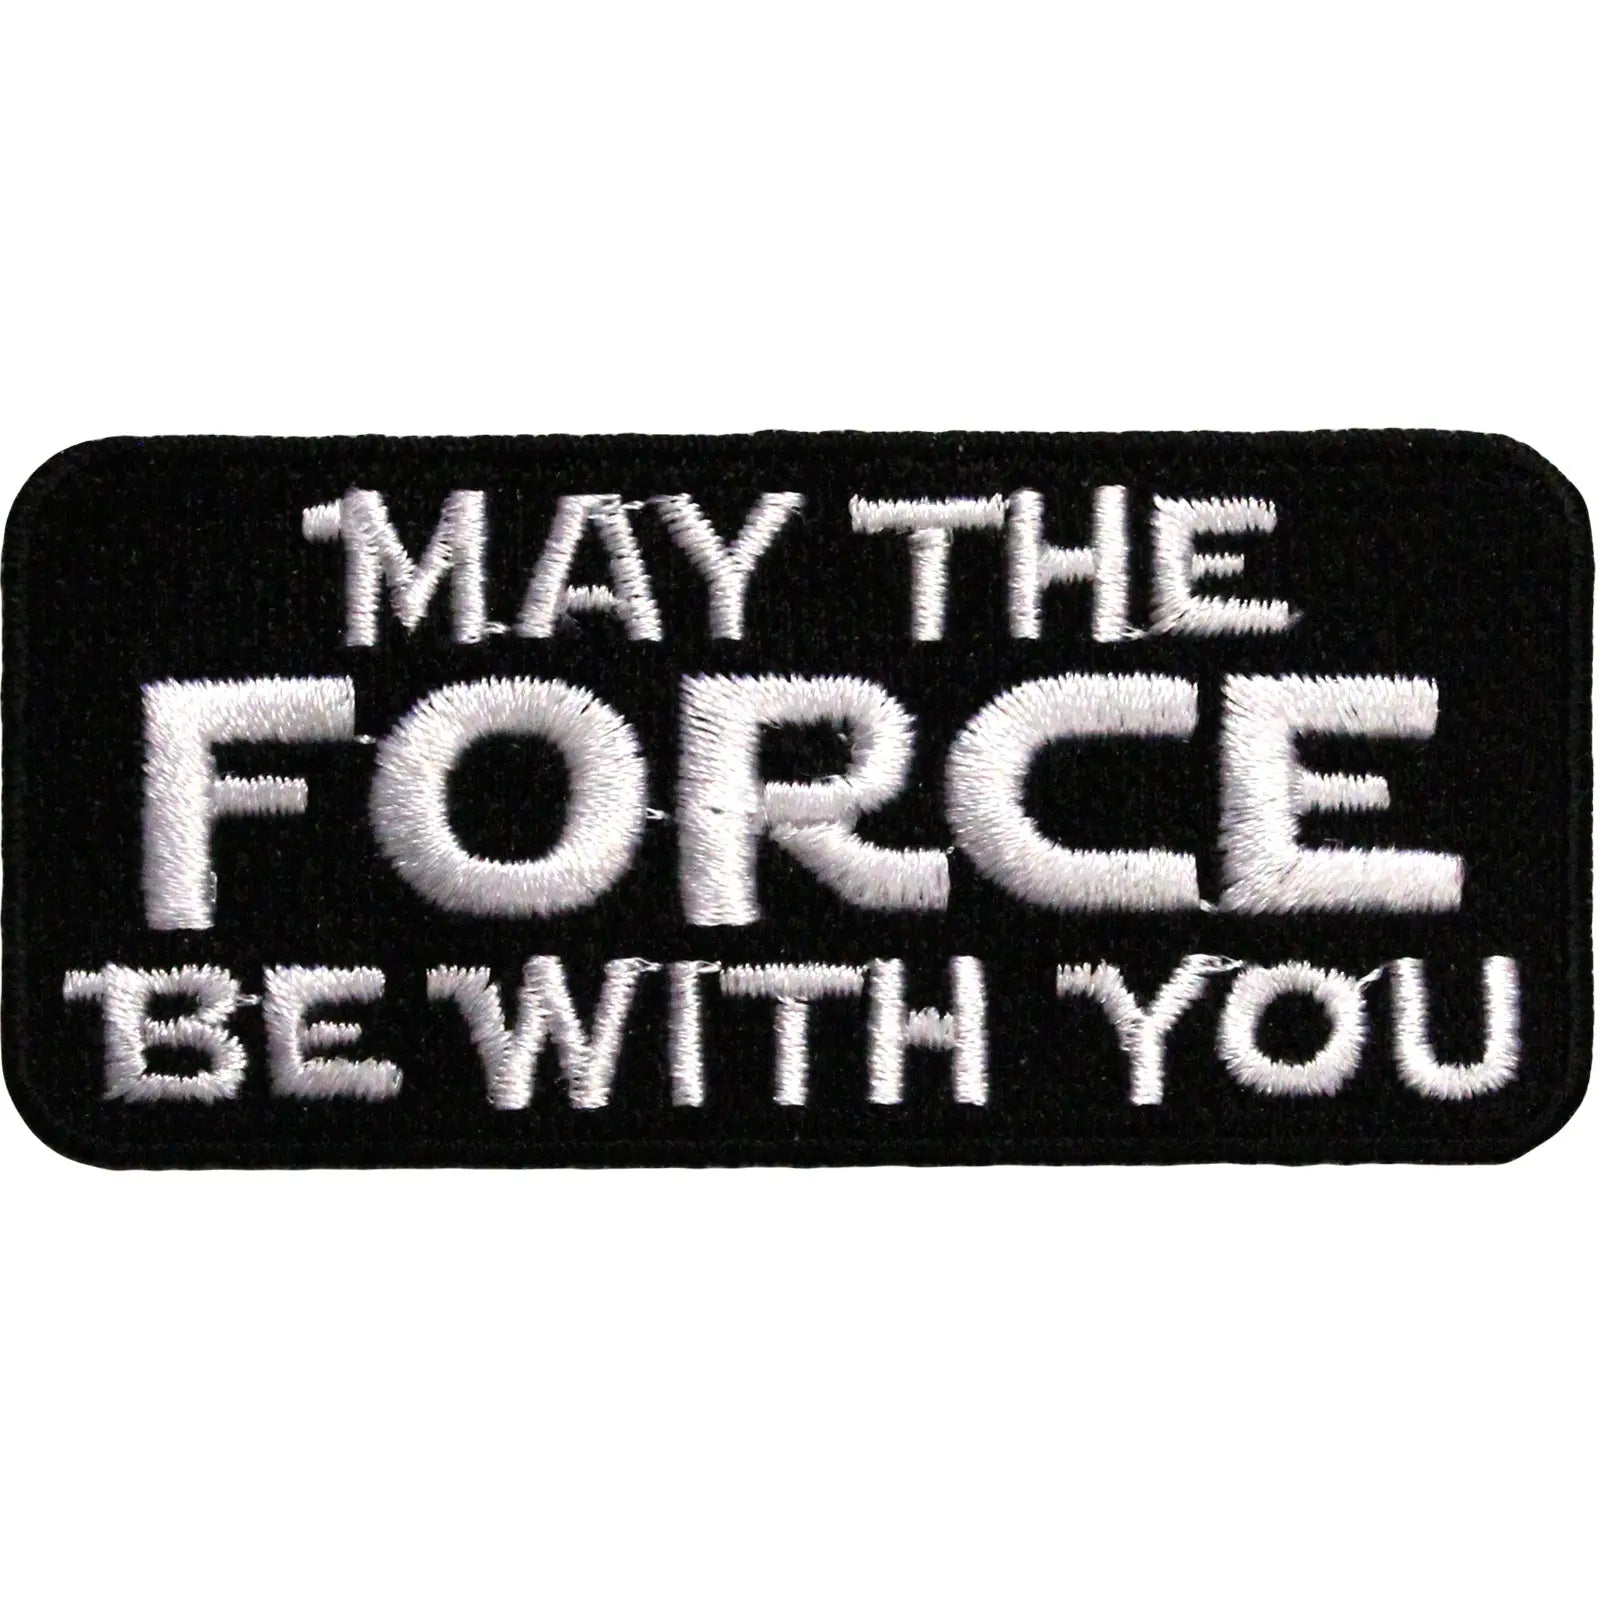 Star Wars Patches May The Force Be With You & The Resistance Depends On You